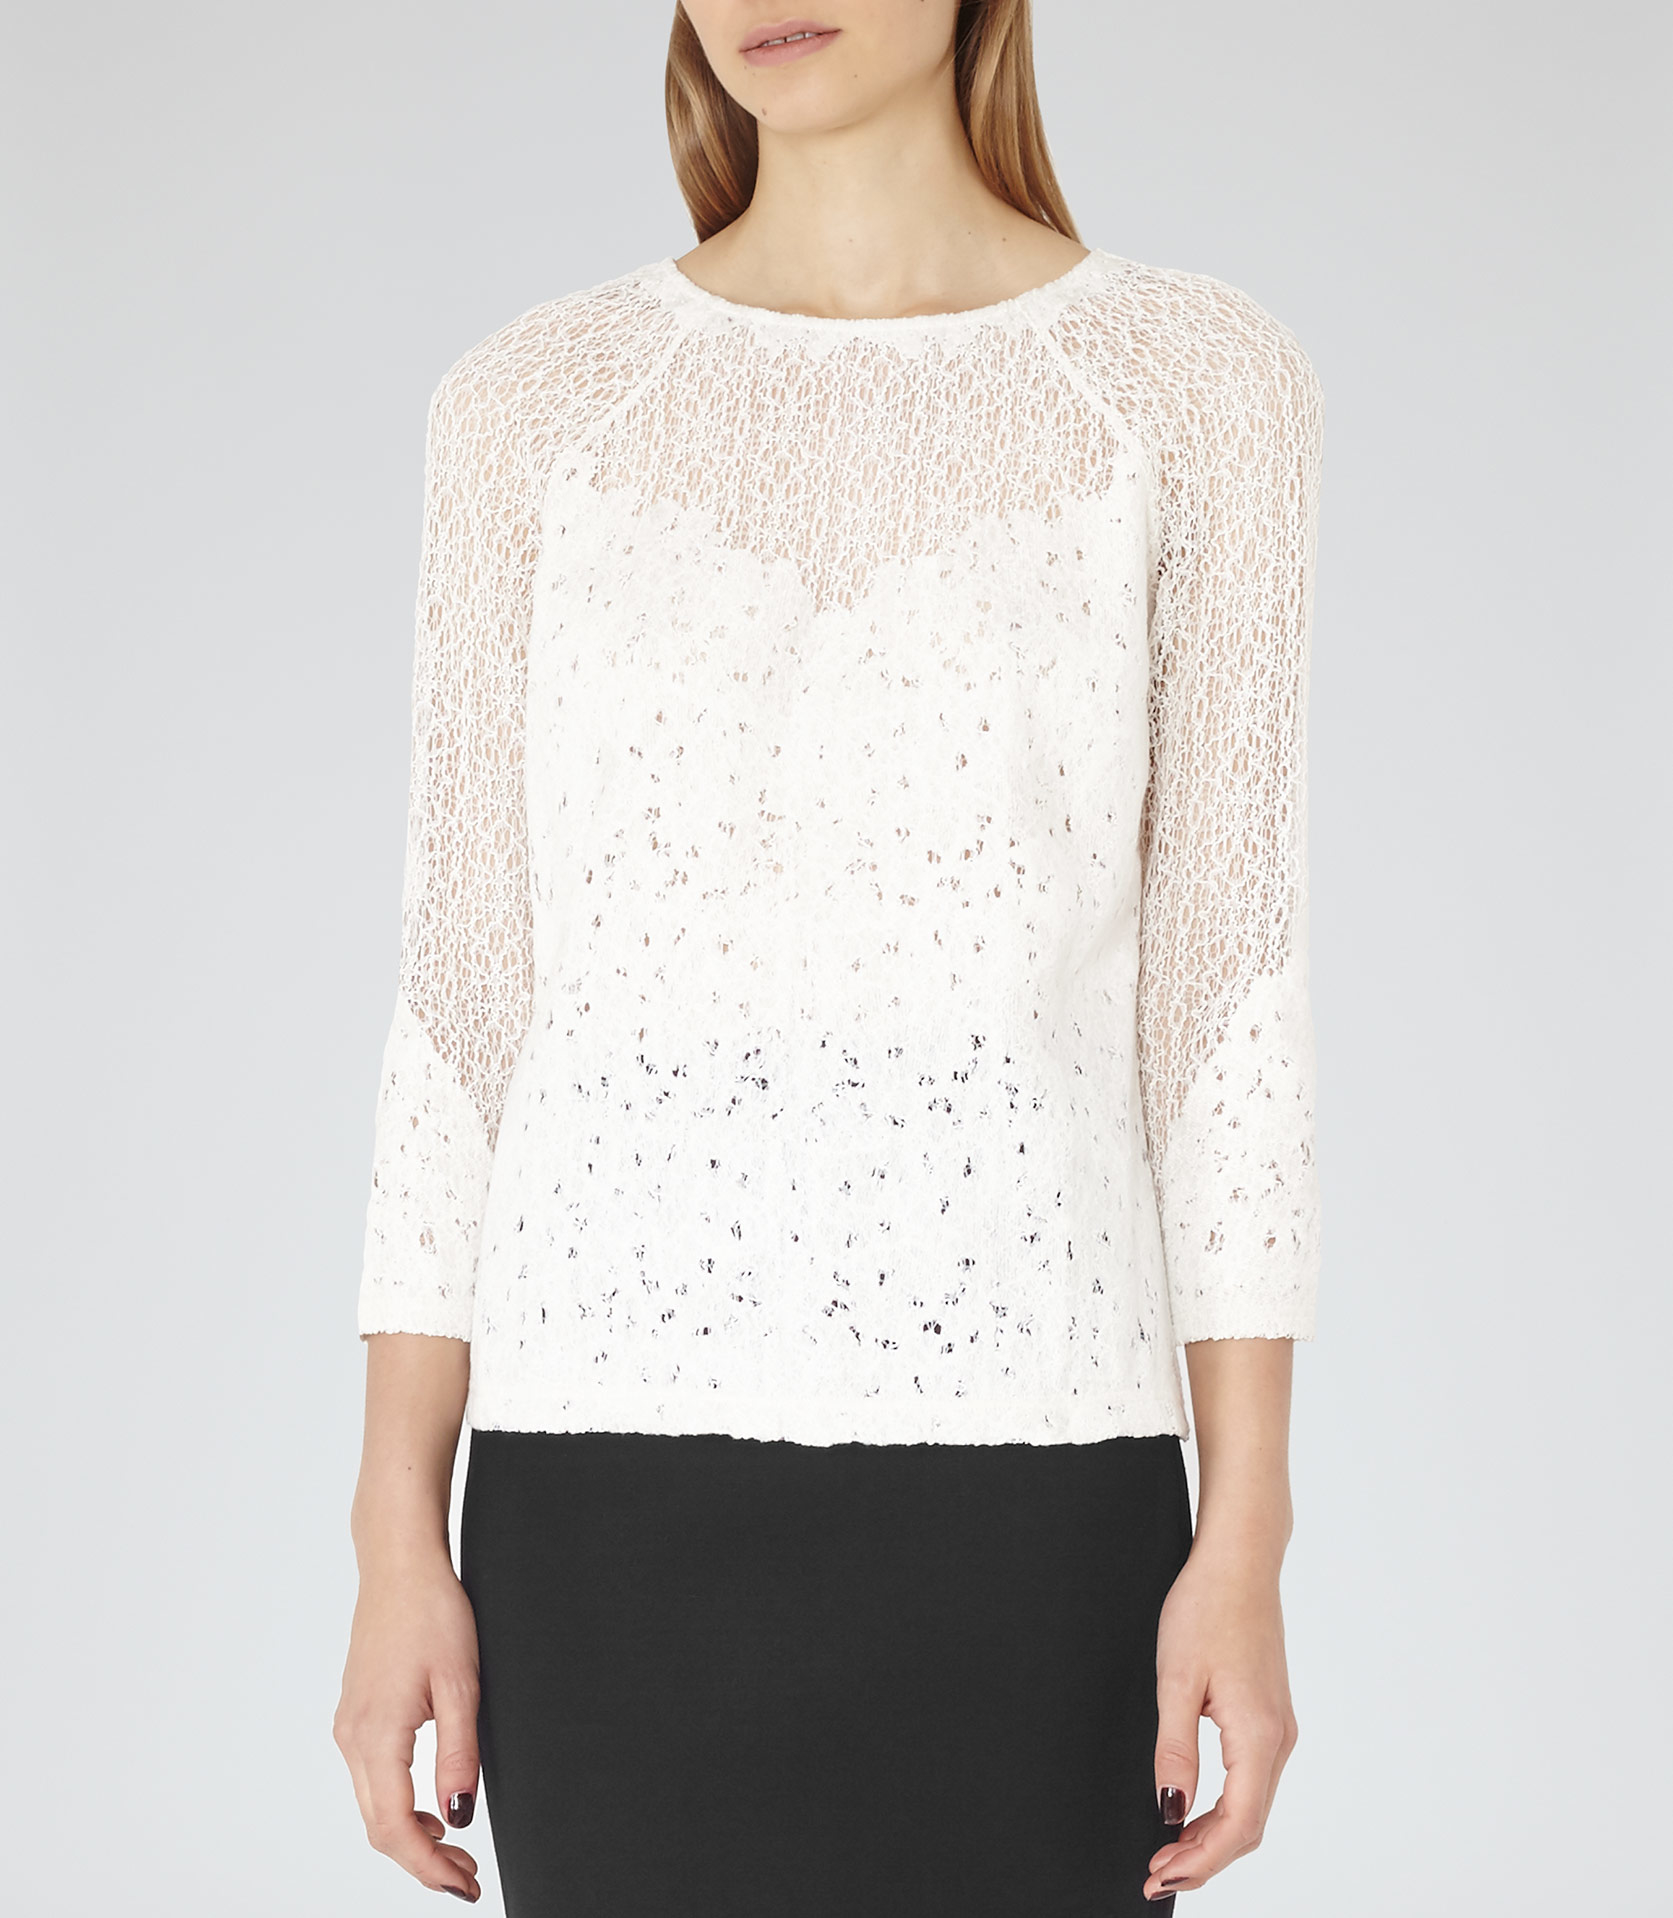 Lyst - Reiss Shell Lace Top in White